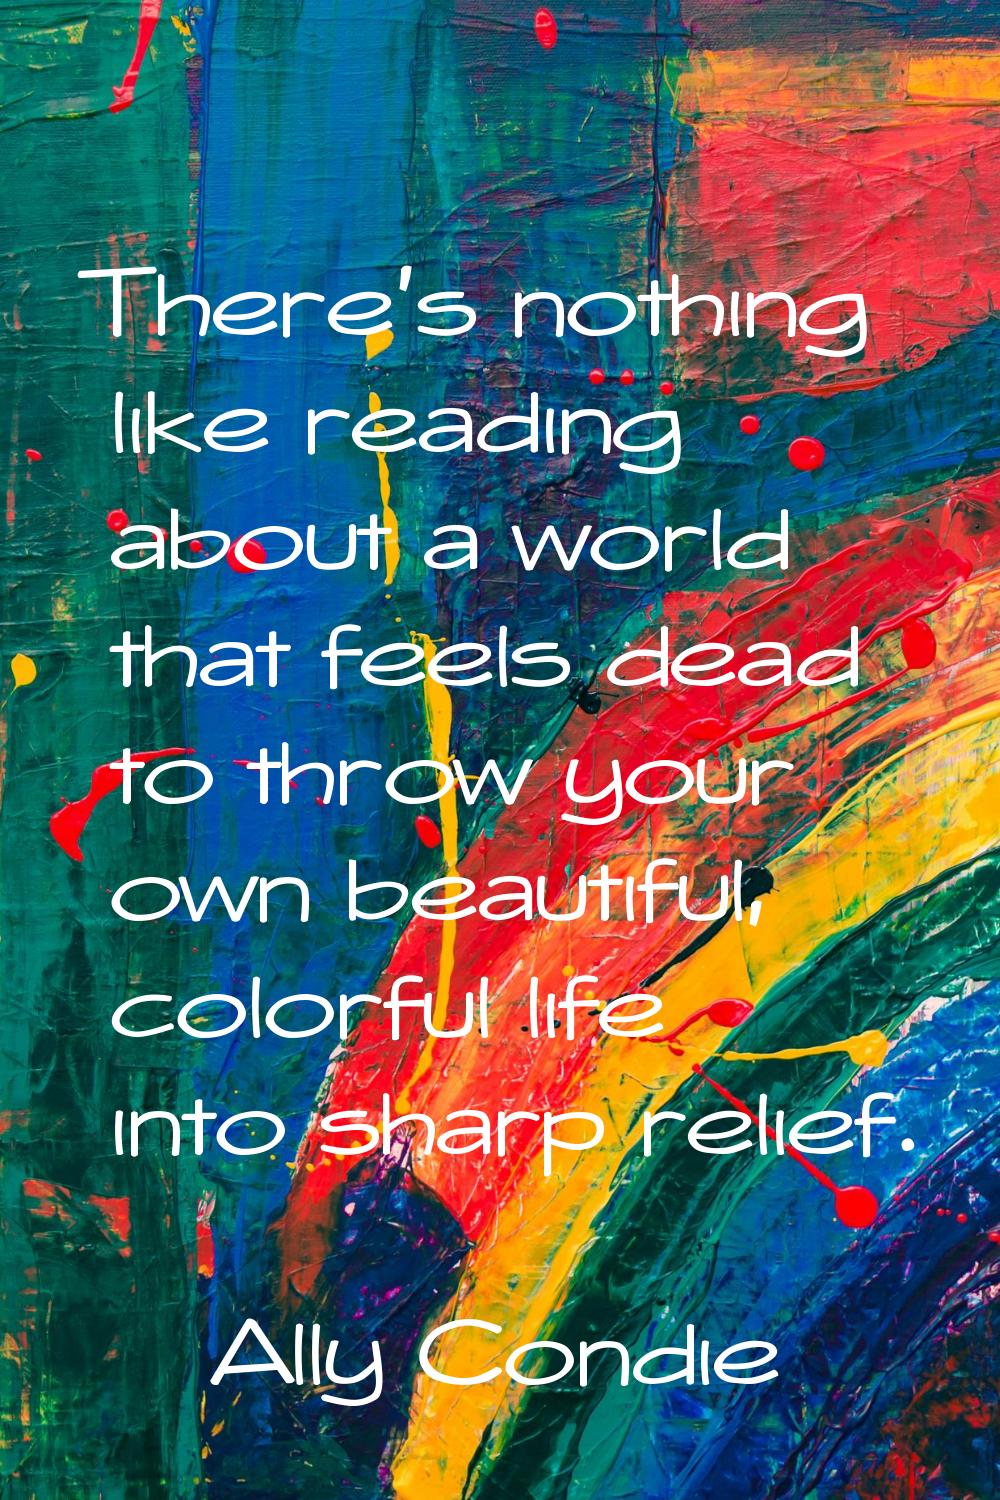 There's nothing like reading about a world that feels dead to throw your own beautiful, colorful li